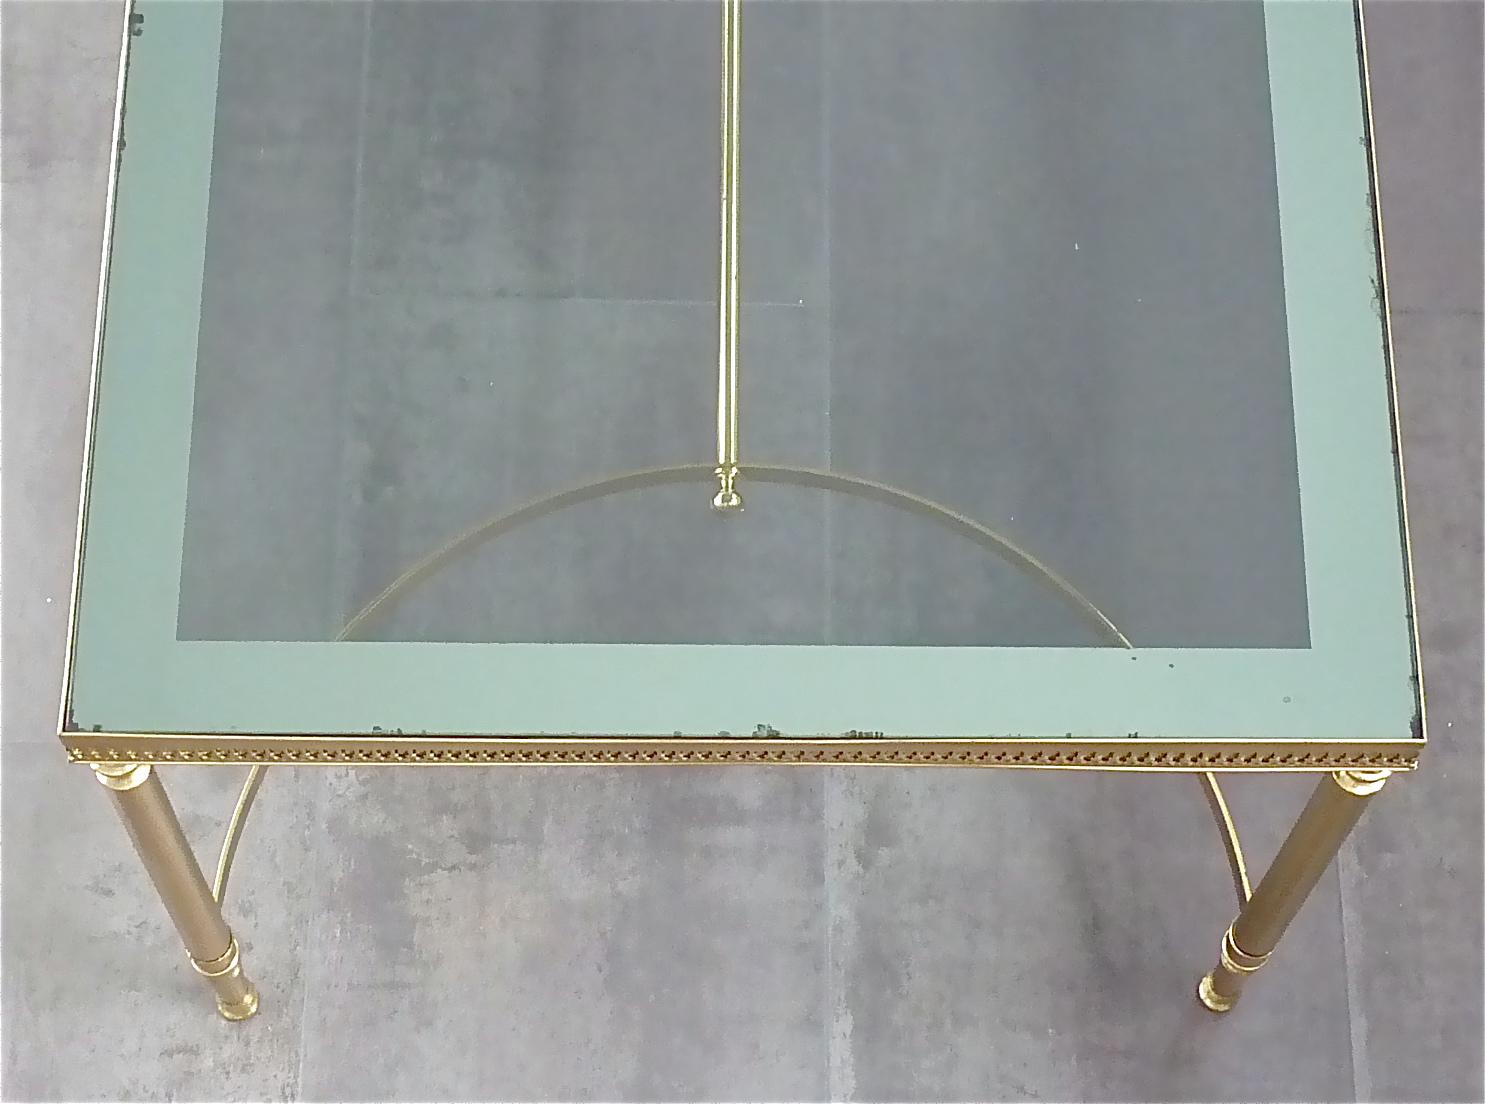 French Midcentury Maison Baguès Jansen Couch Sofa Table Brass Mirror Glass 1950s For Sale 2